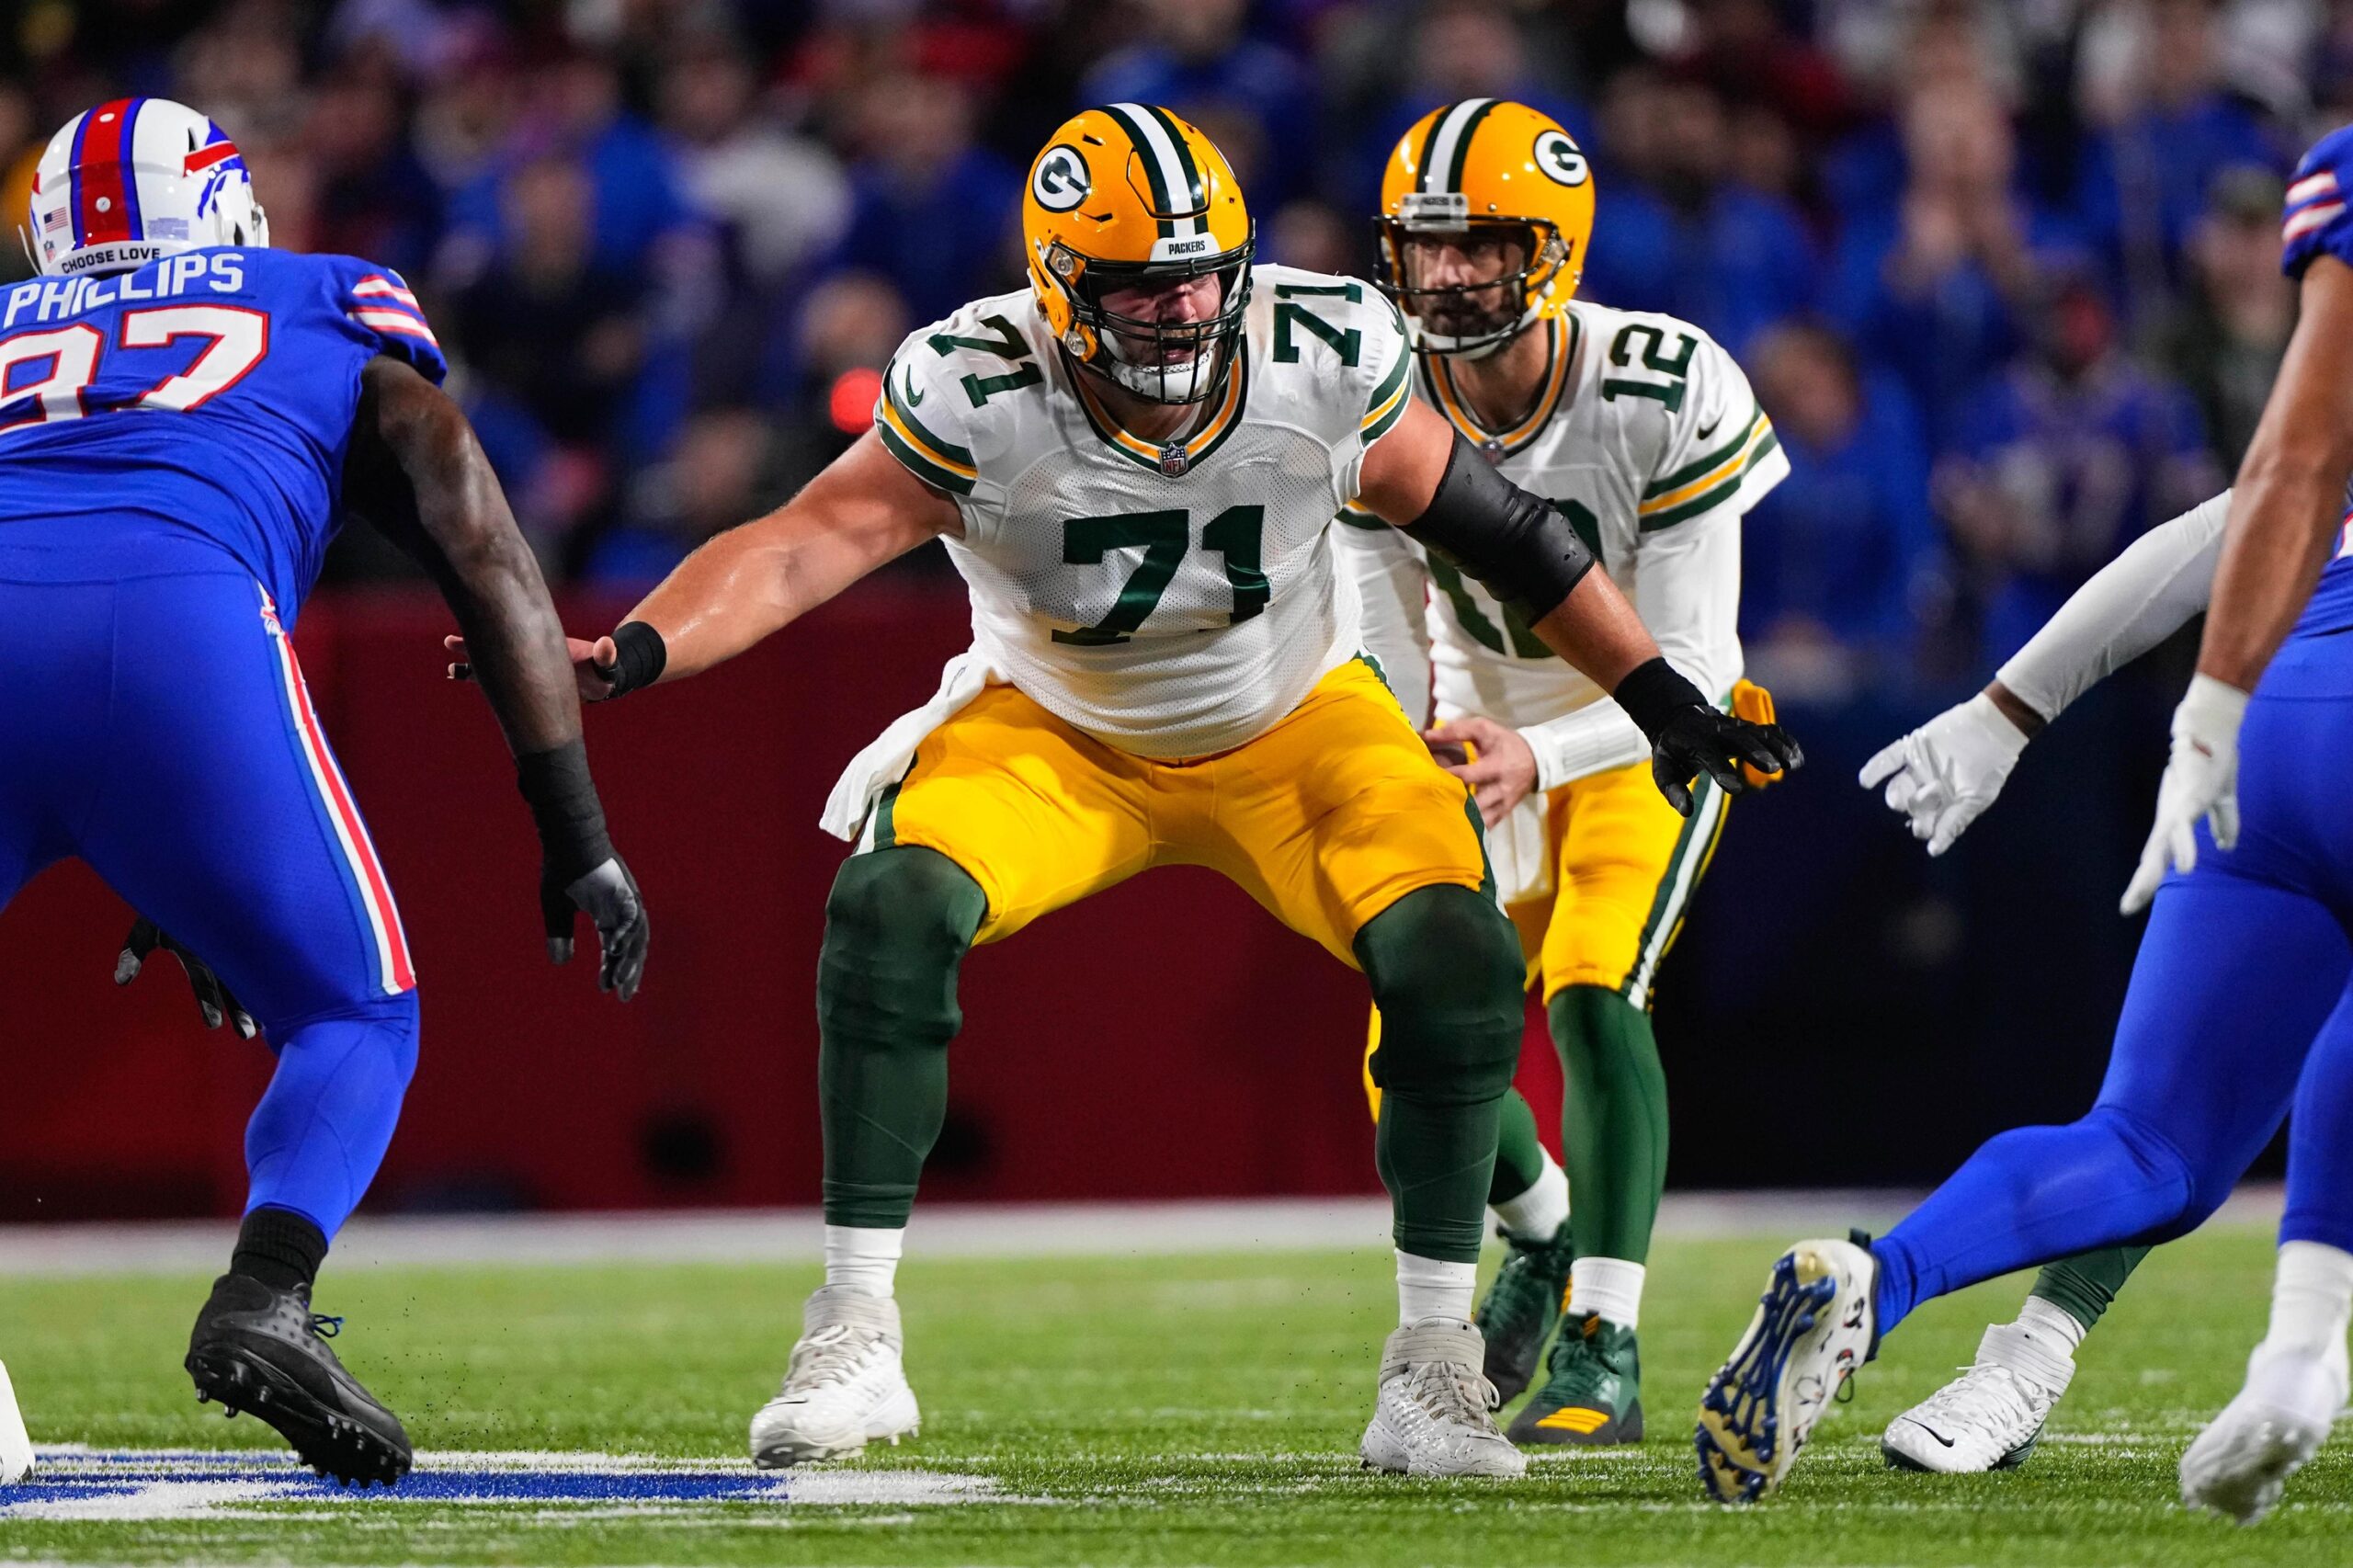 Could Josh Myers lose his starting job as center for the Green Bay Packers to Zach Tom?